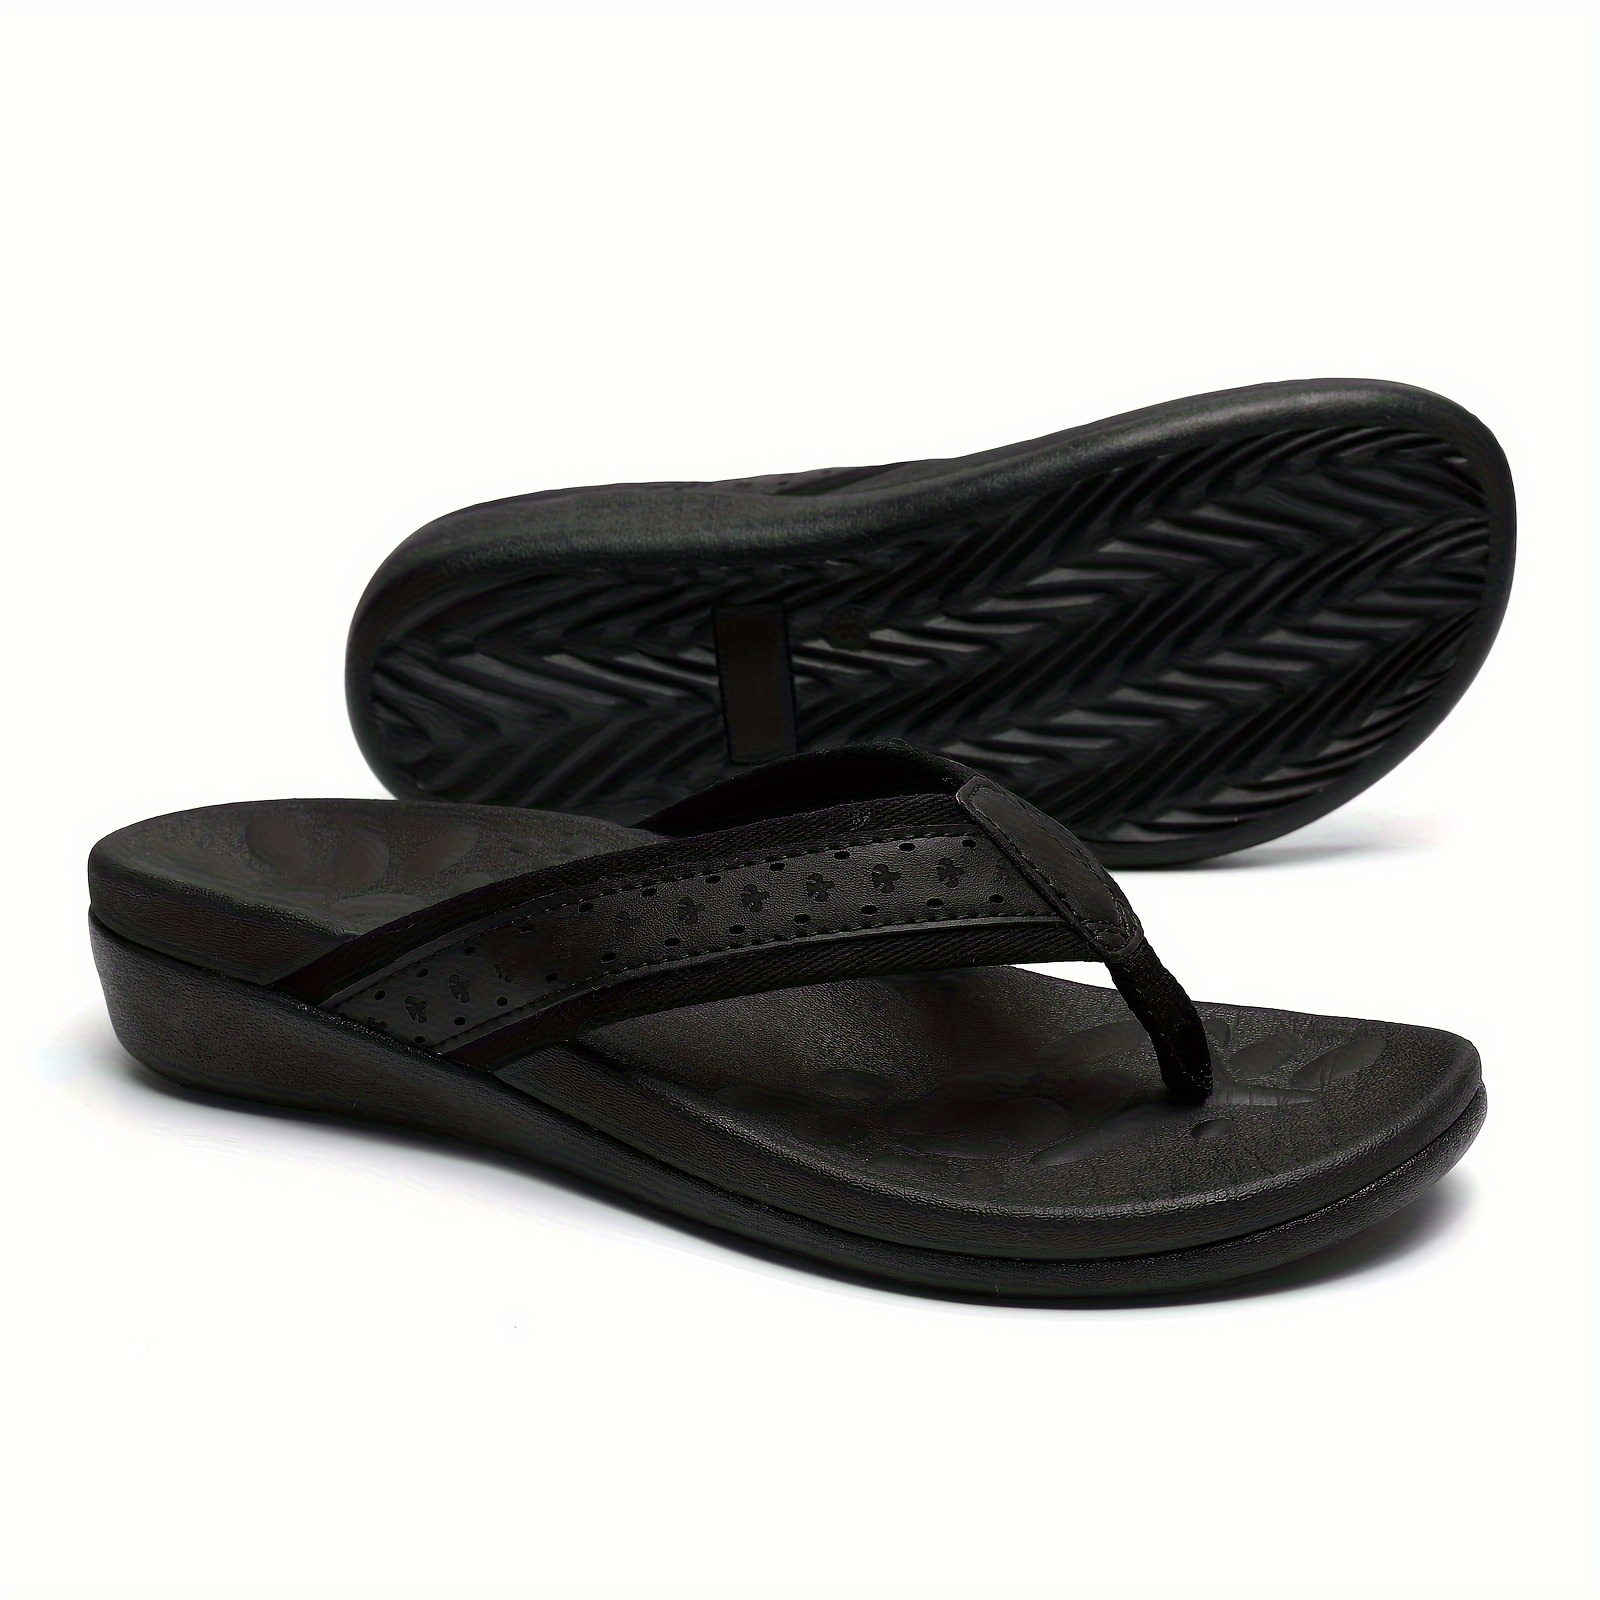 

Megnya Women's Flip-flops Have Arch Support, Flat Slippers For The Beach, And Comfortable Cushioned Foam Slippers For The Outdoors